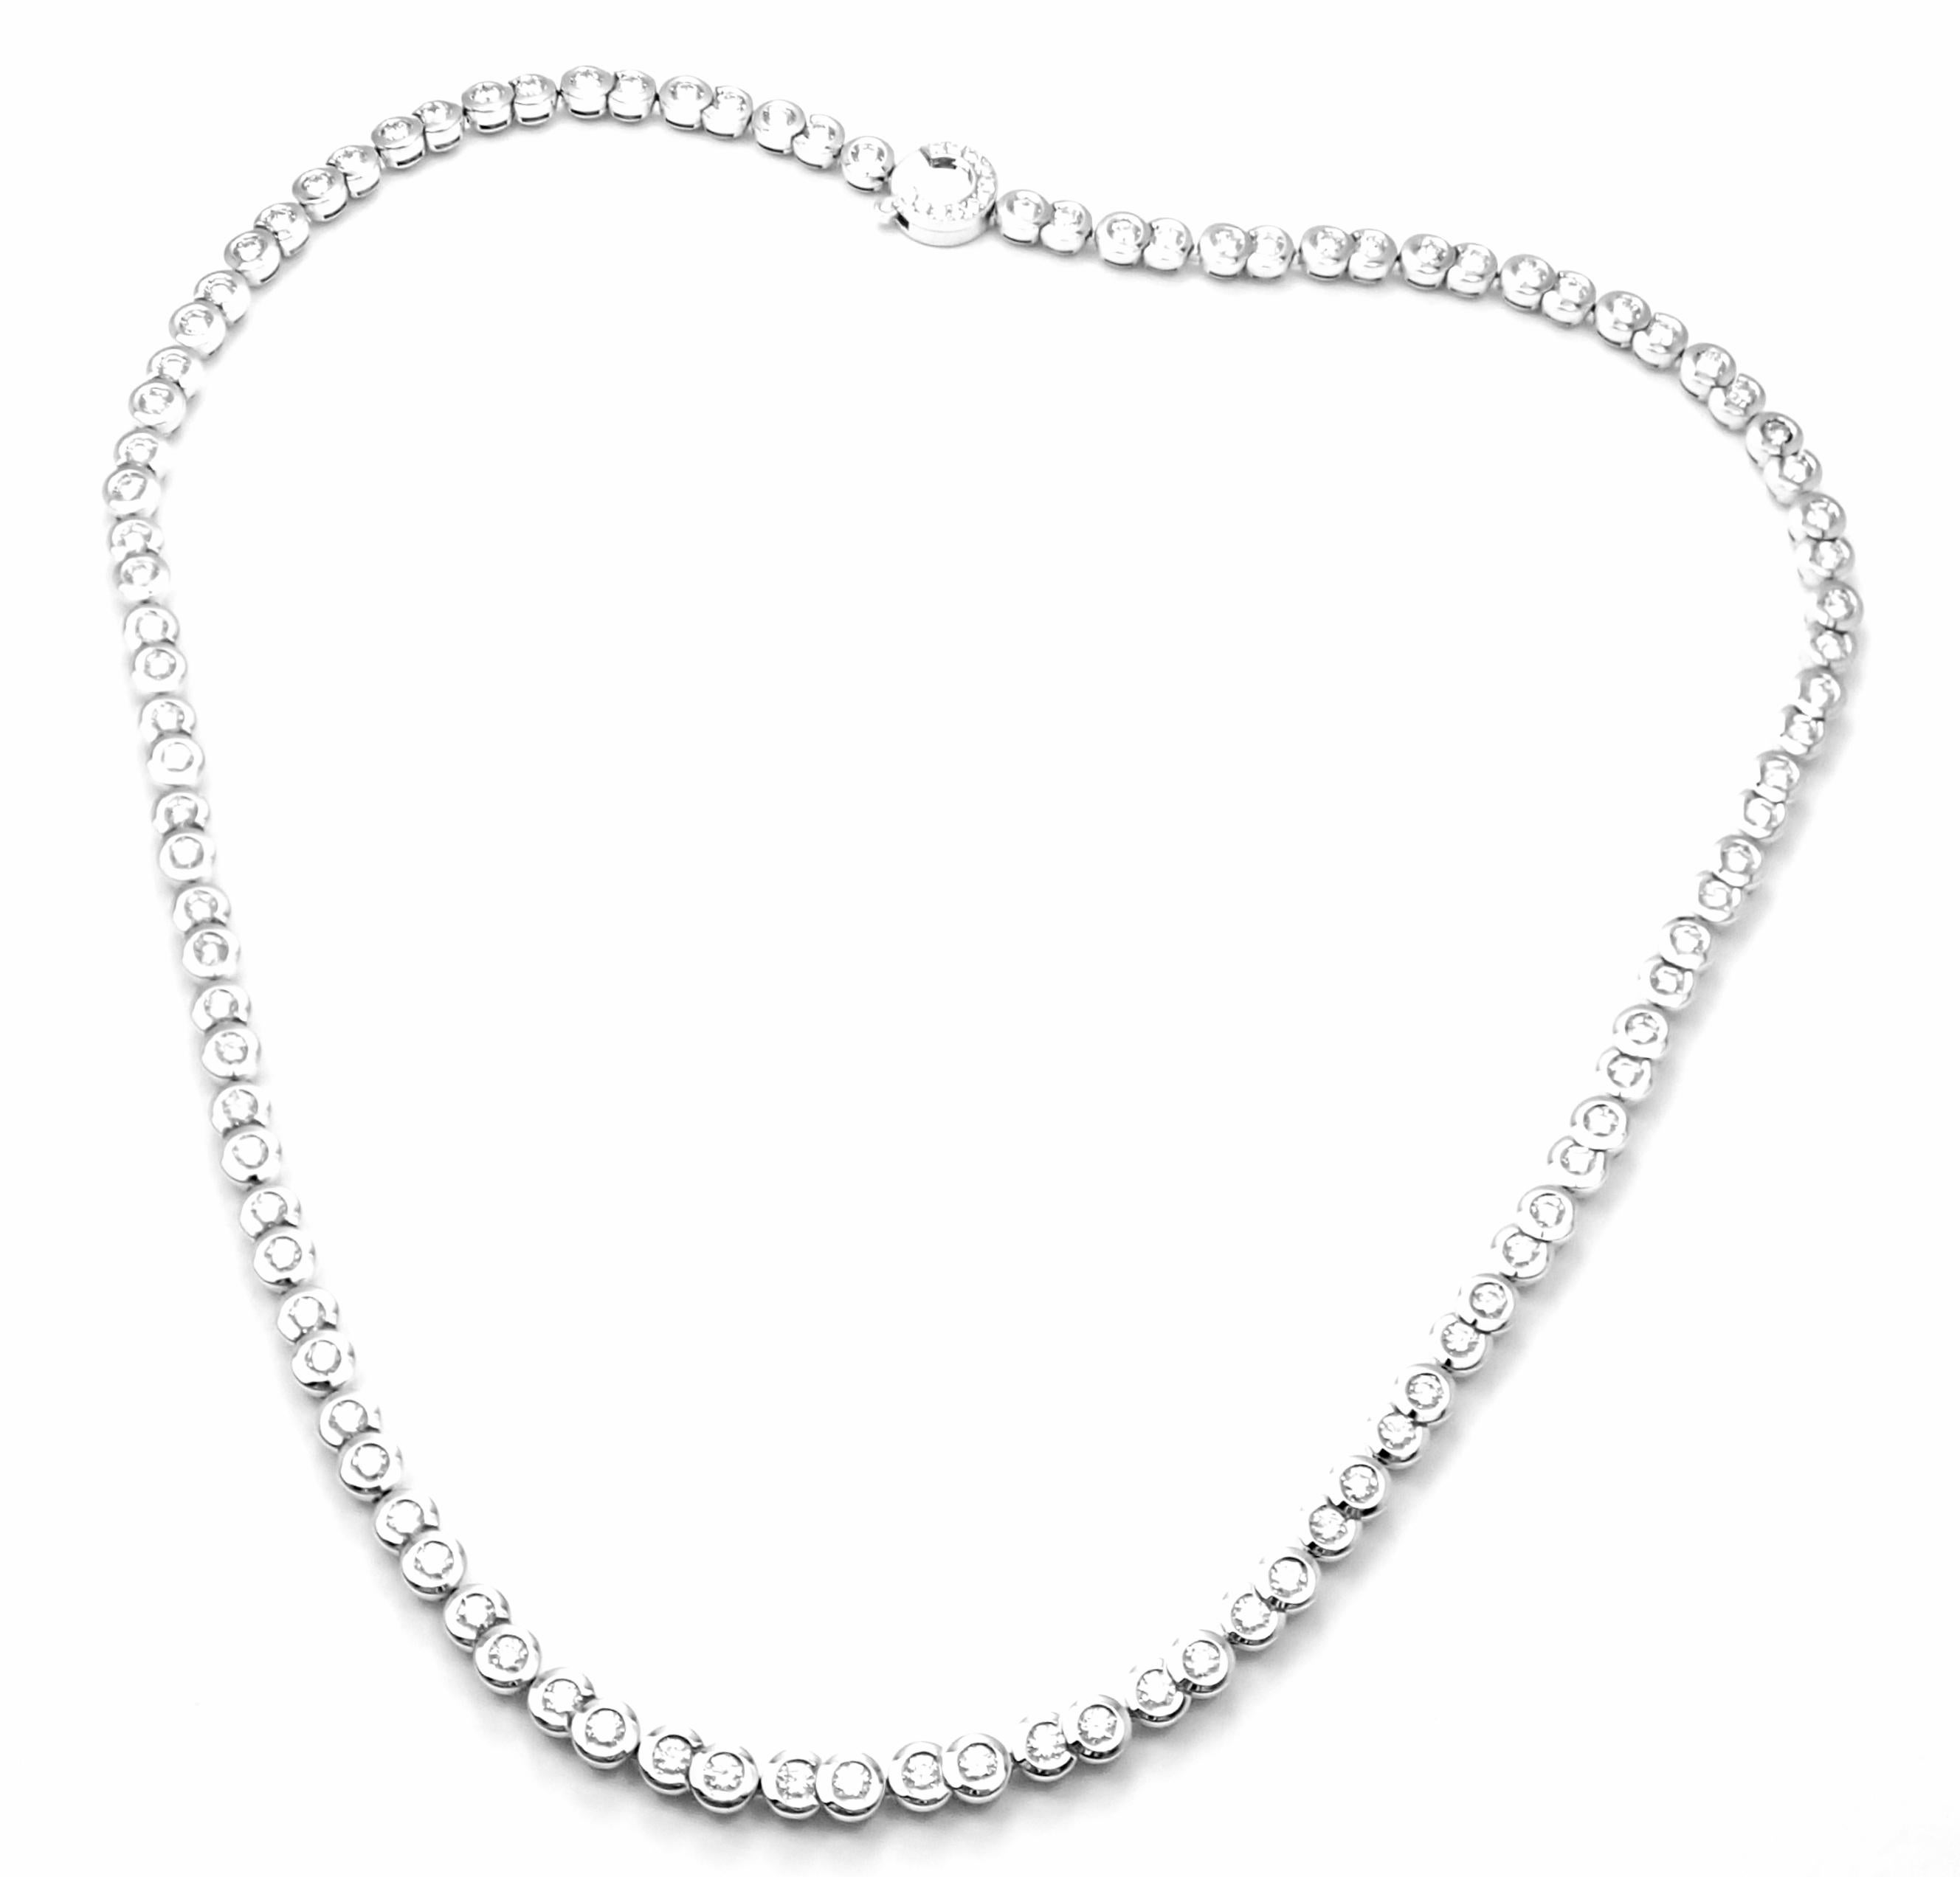 18k White Gold Diamond Line Tennes Necklace by Chanel. 
With 112 round brilliant cut diamonds VS1 clarity, E color Total weight approx. 8ct
This necklace comes with authenticity paper.
Details: 
Weight: 43.4 grams
Length: 16